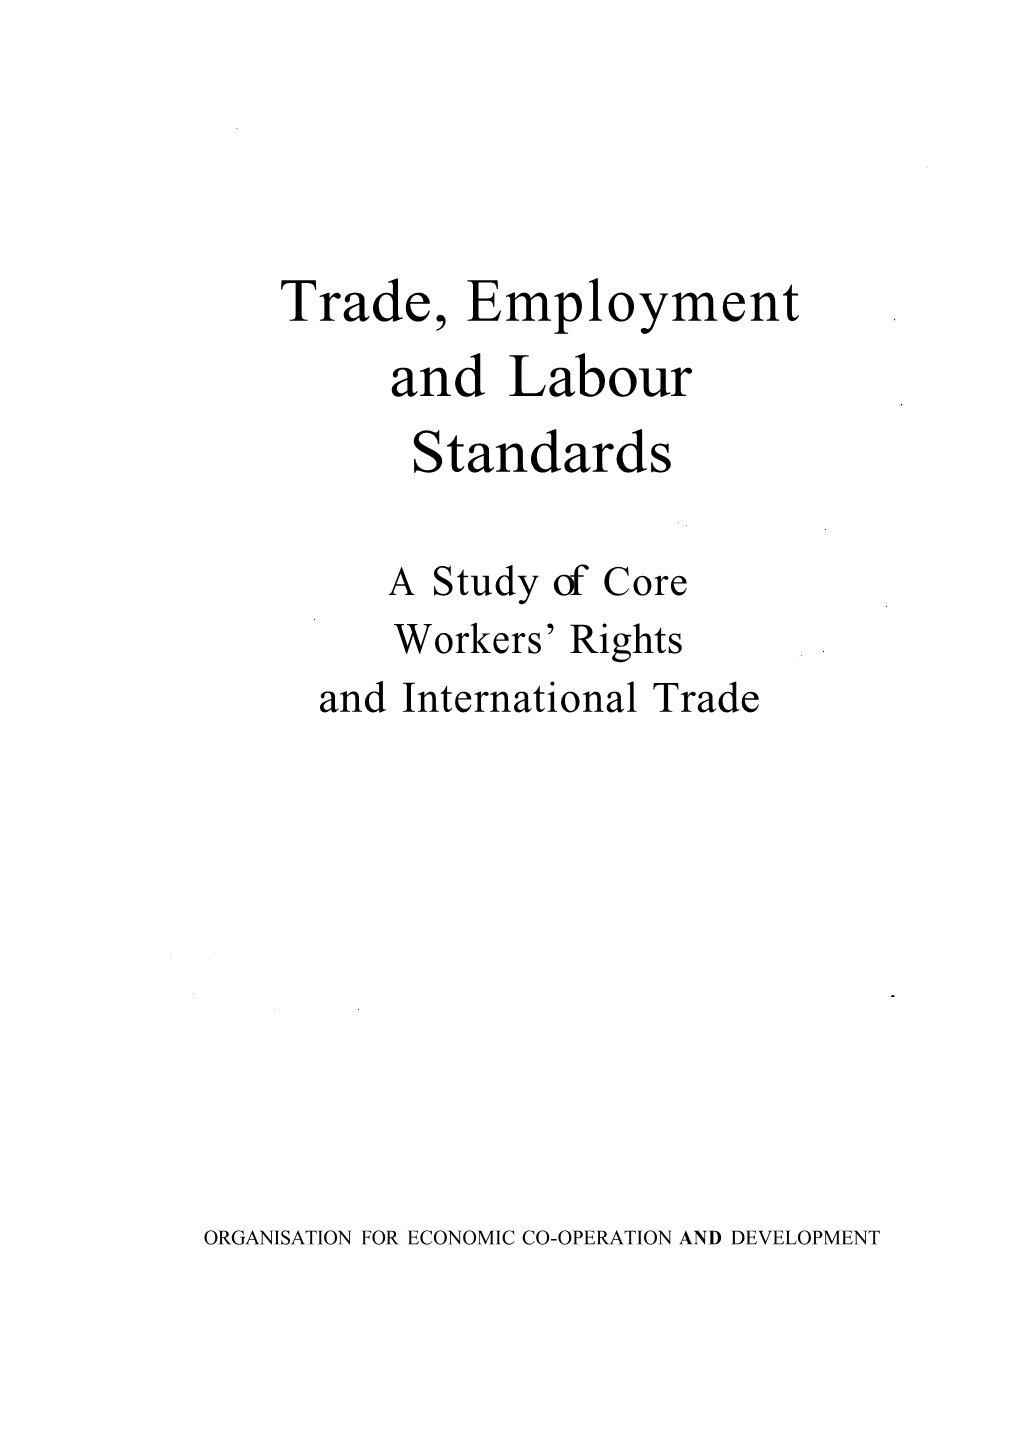 Trade, Employment and Labour Standards